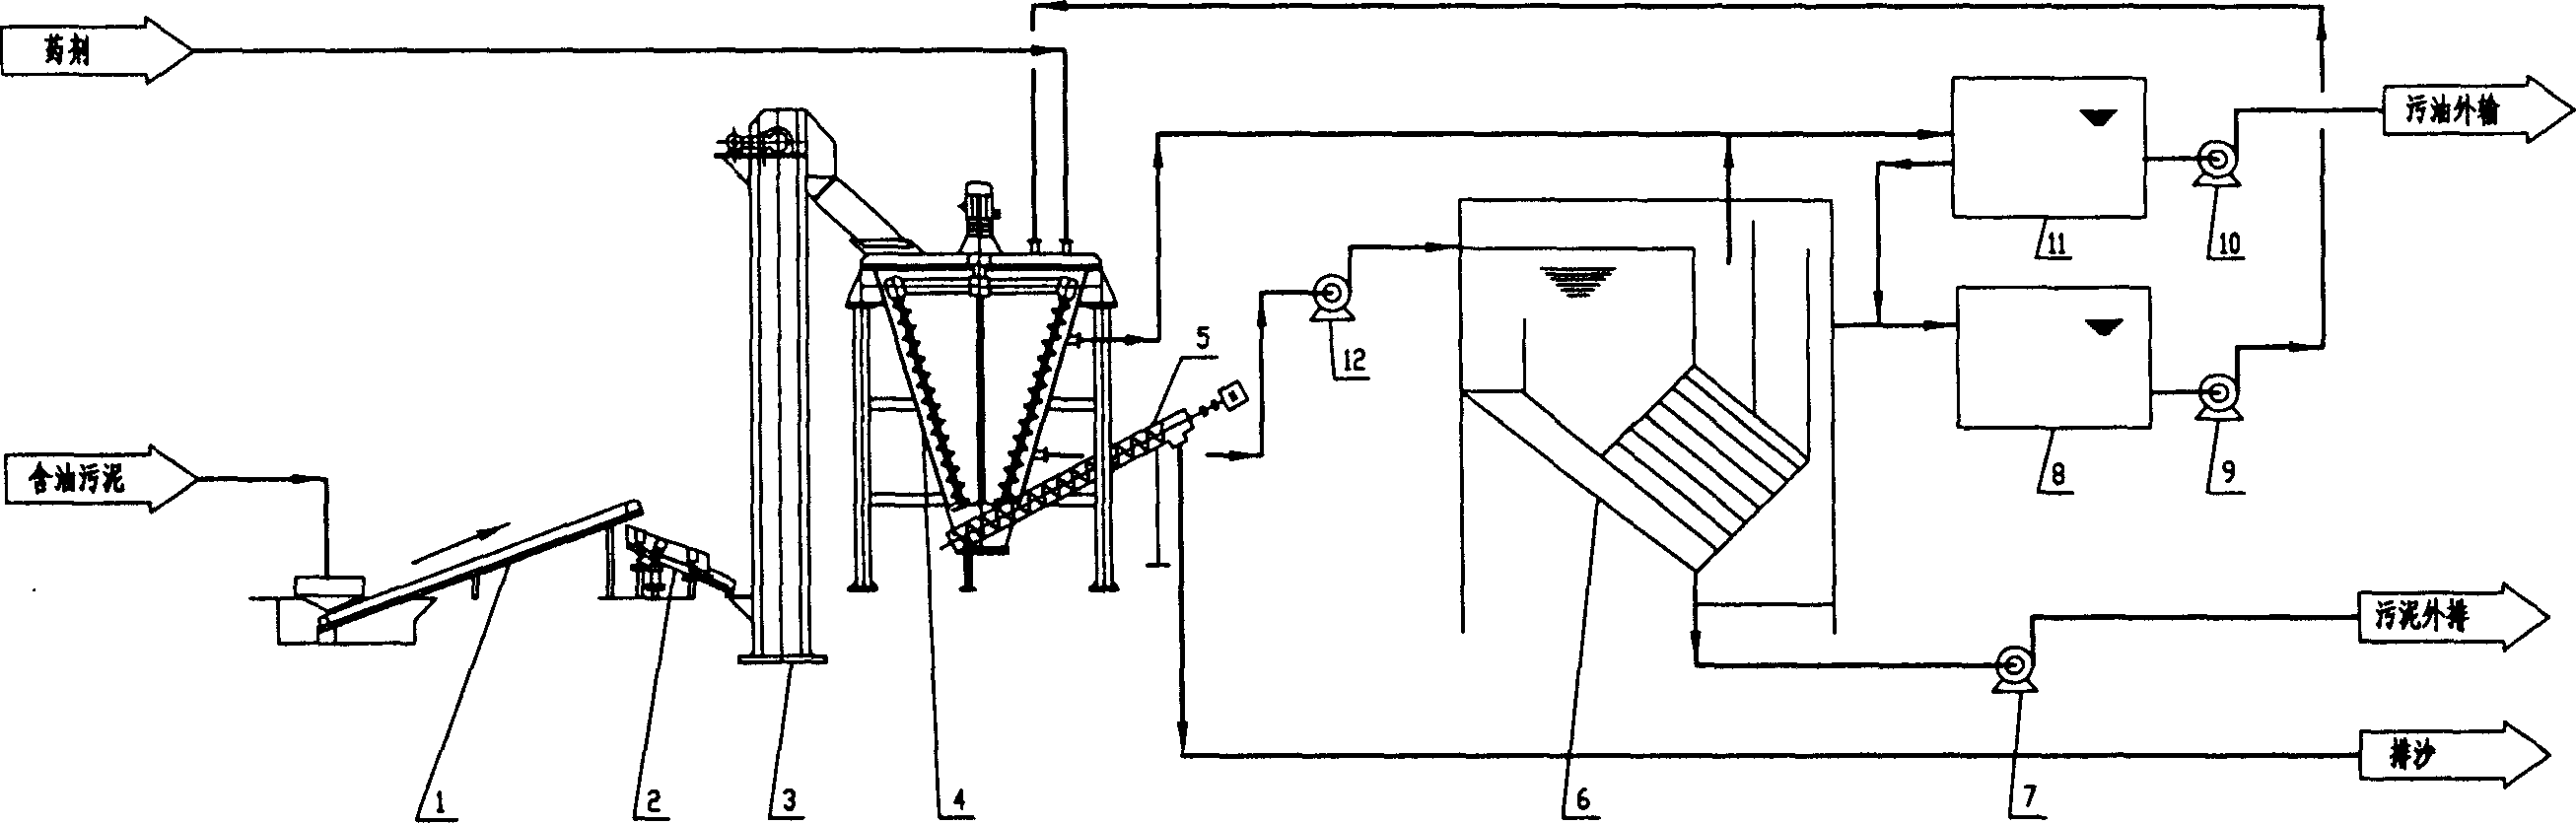 Oil-containing sludge fluidization and reduction process